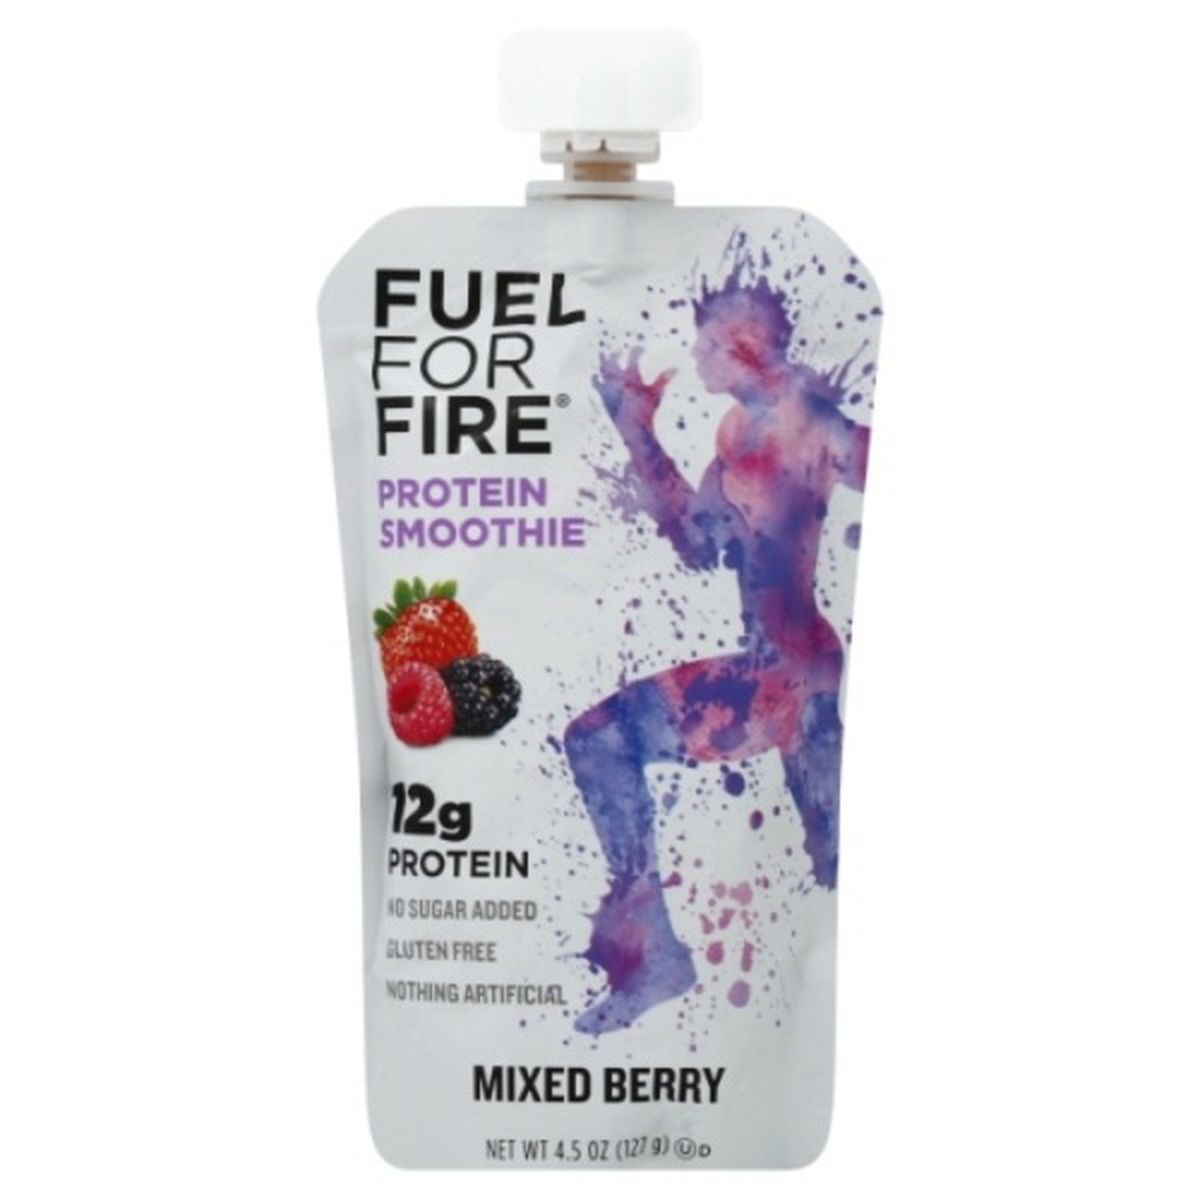 Calories in Fuel for Fire Protein Smoothie, Mixed Berry